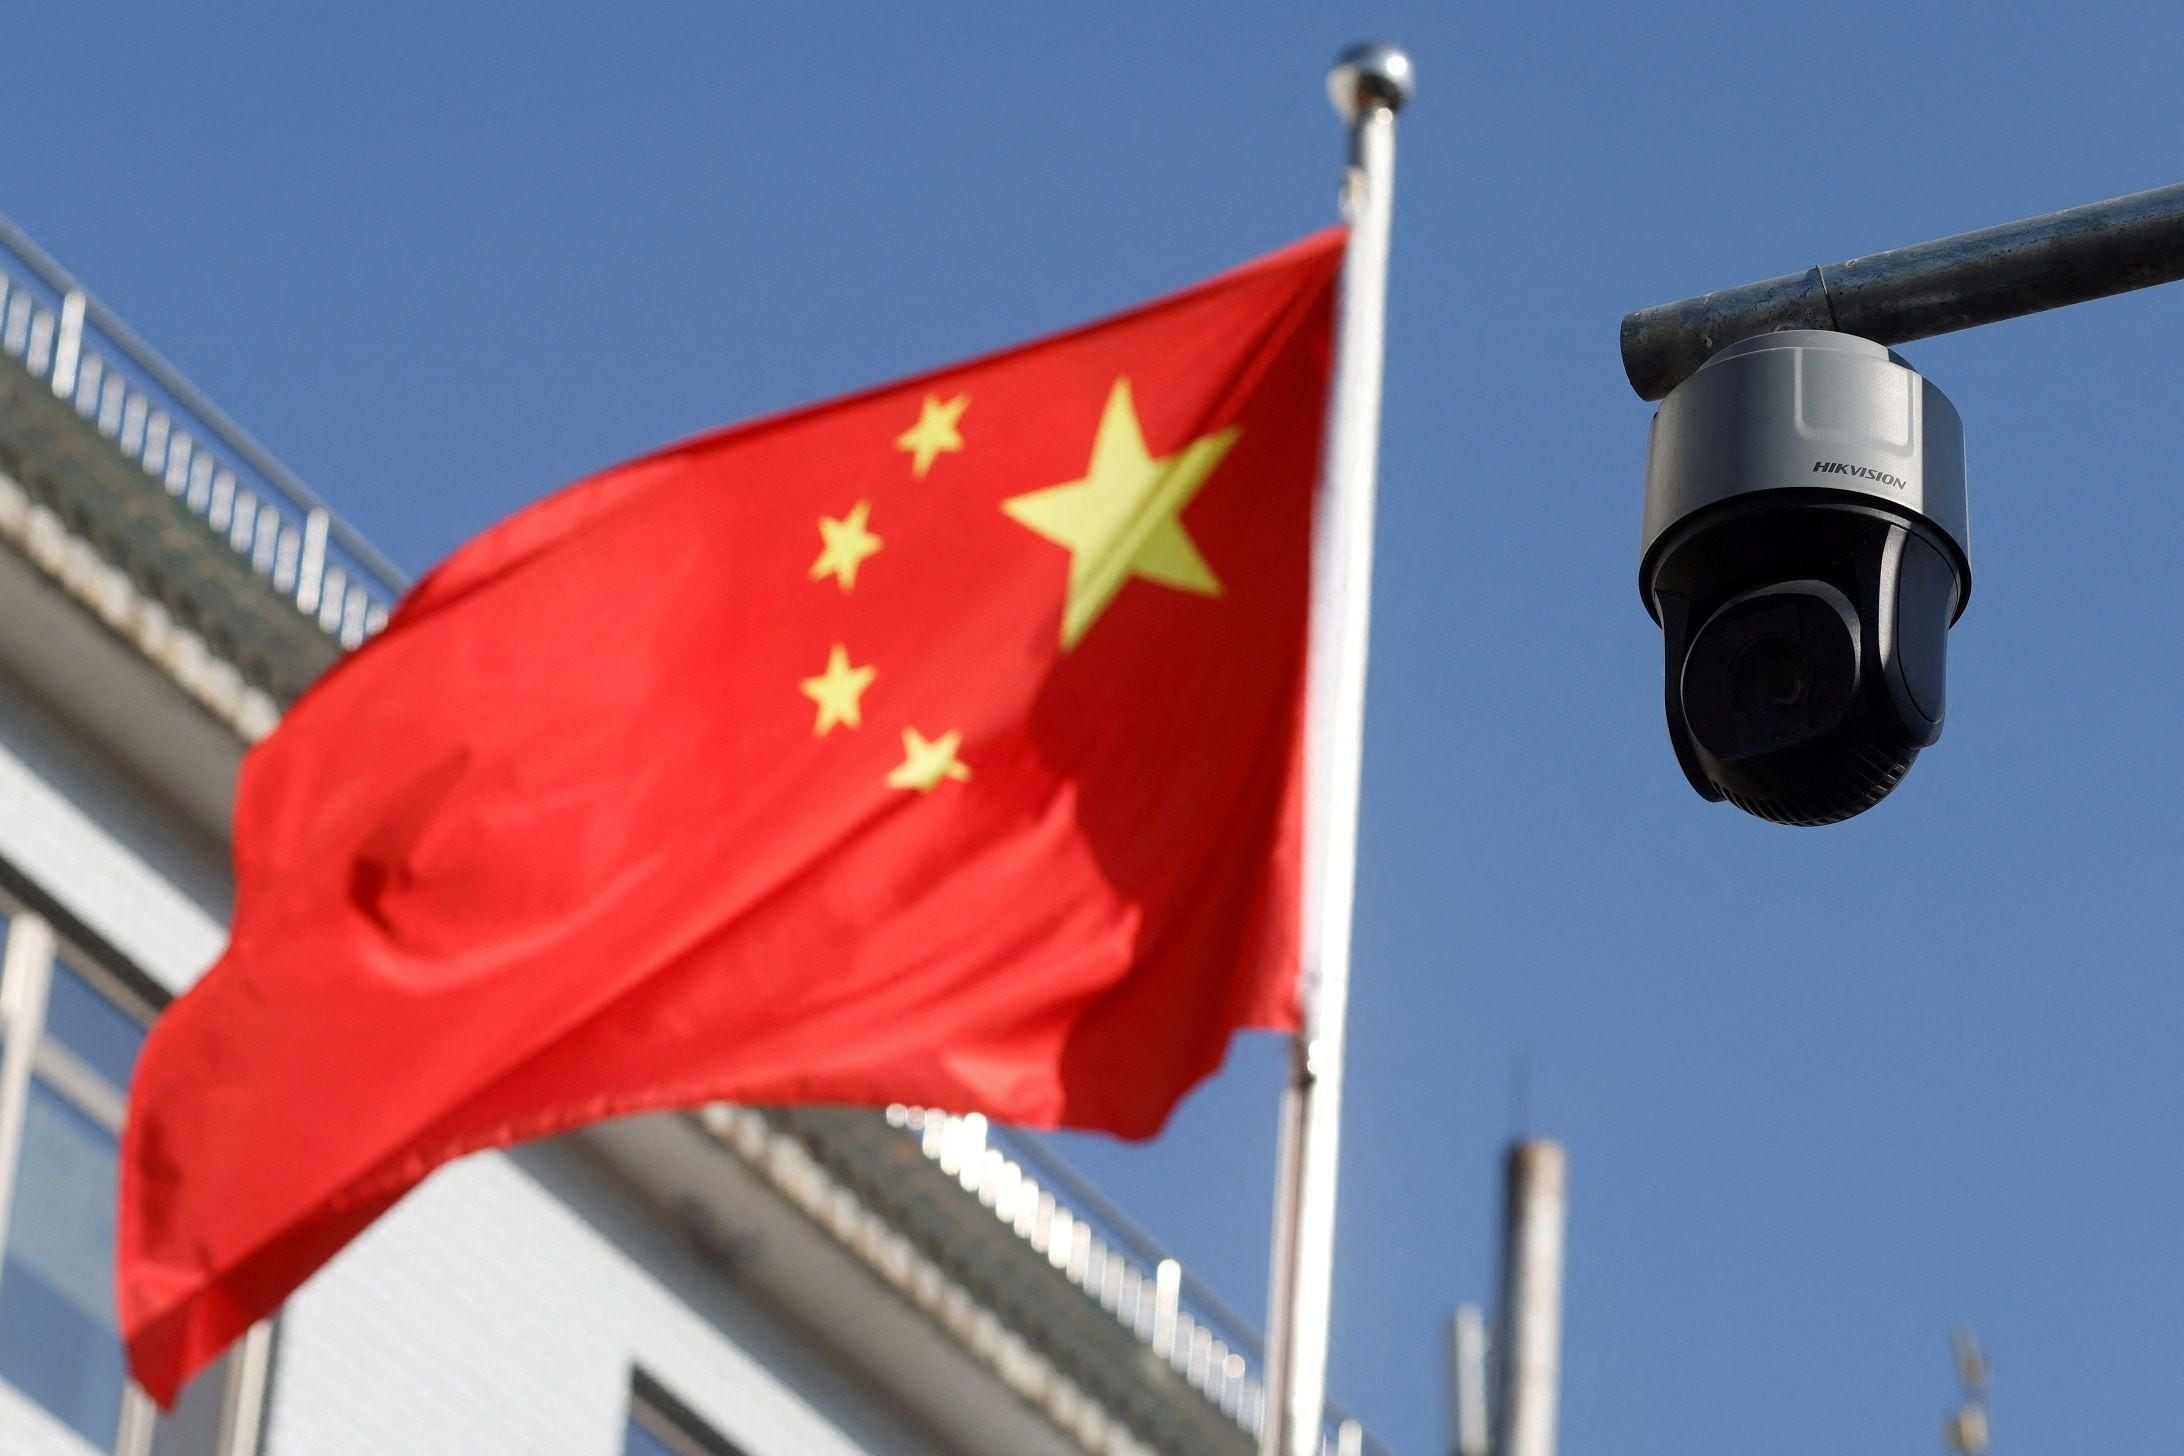 China has one of the largest public surveillance systems in the world and, according to reports, already collects brain wave data.